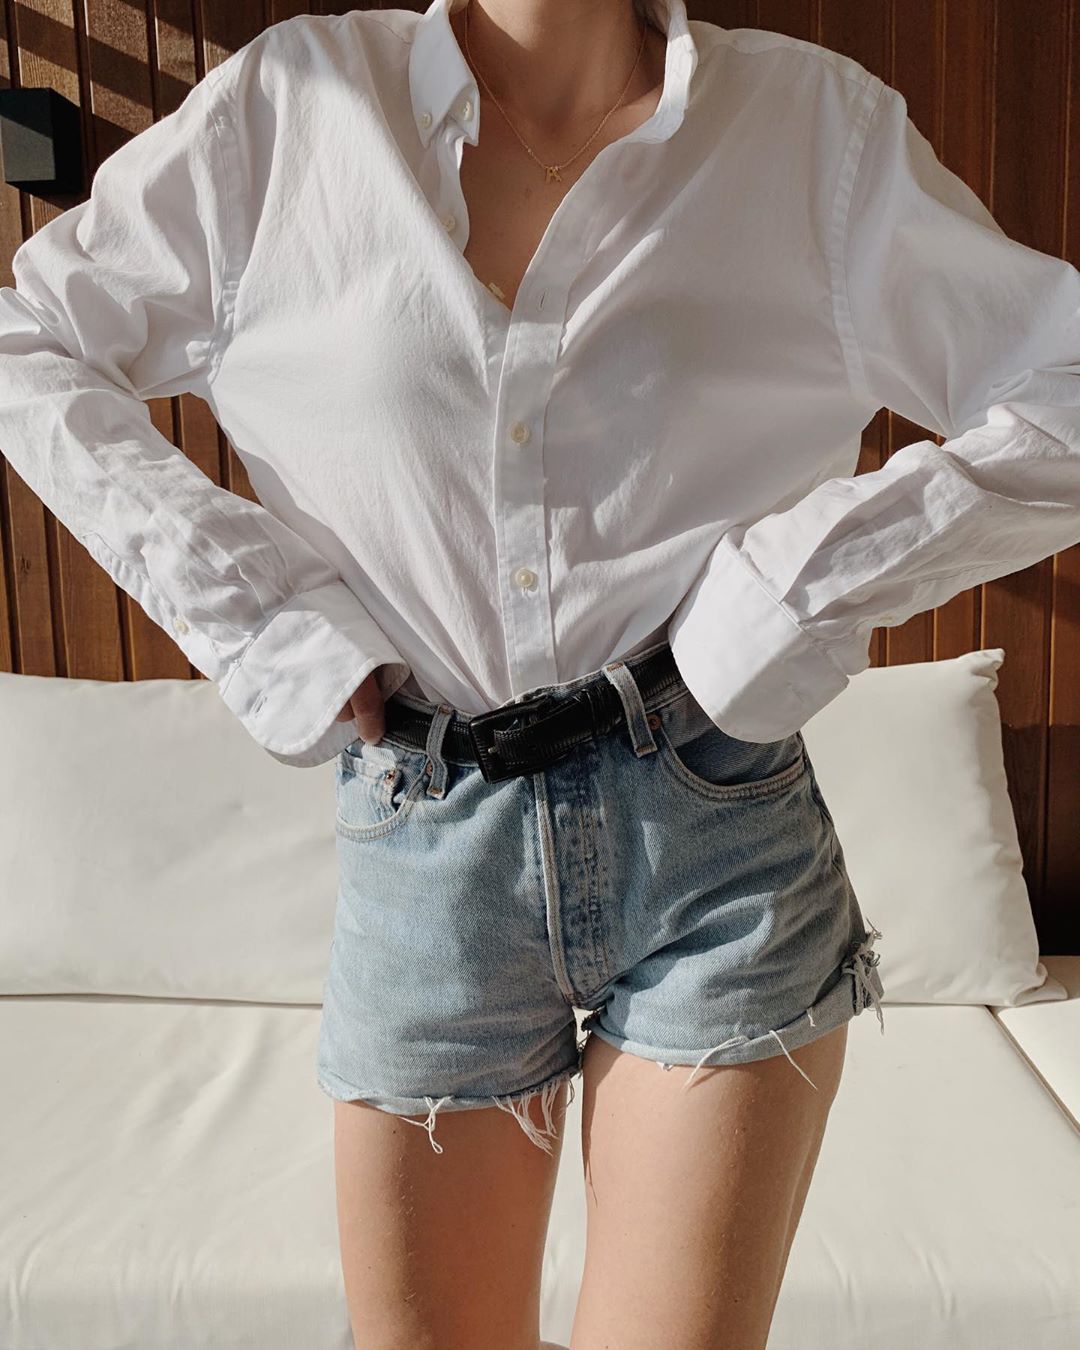 white shorts and shirt outfit